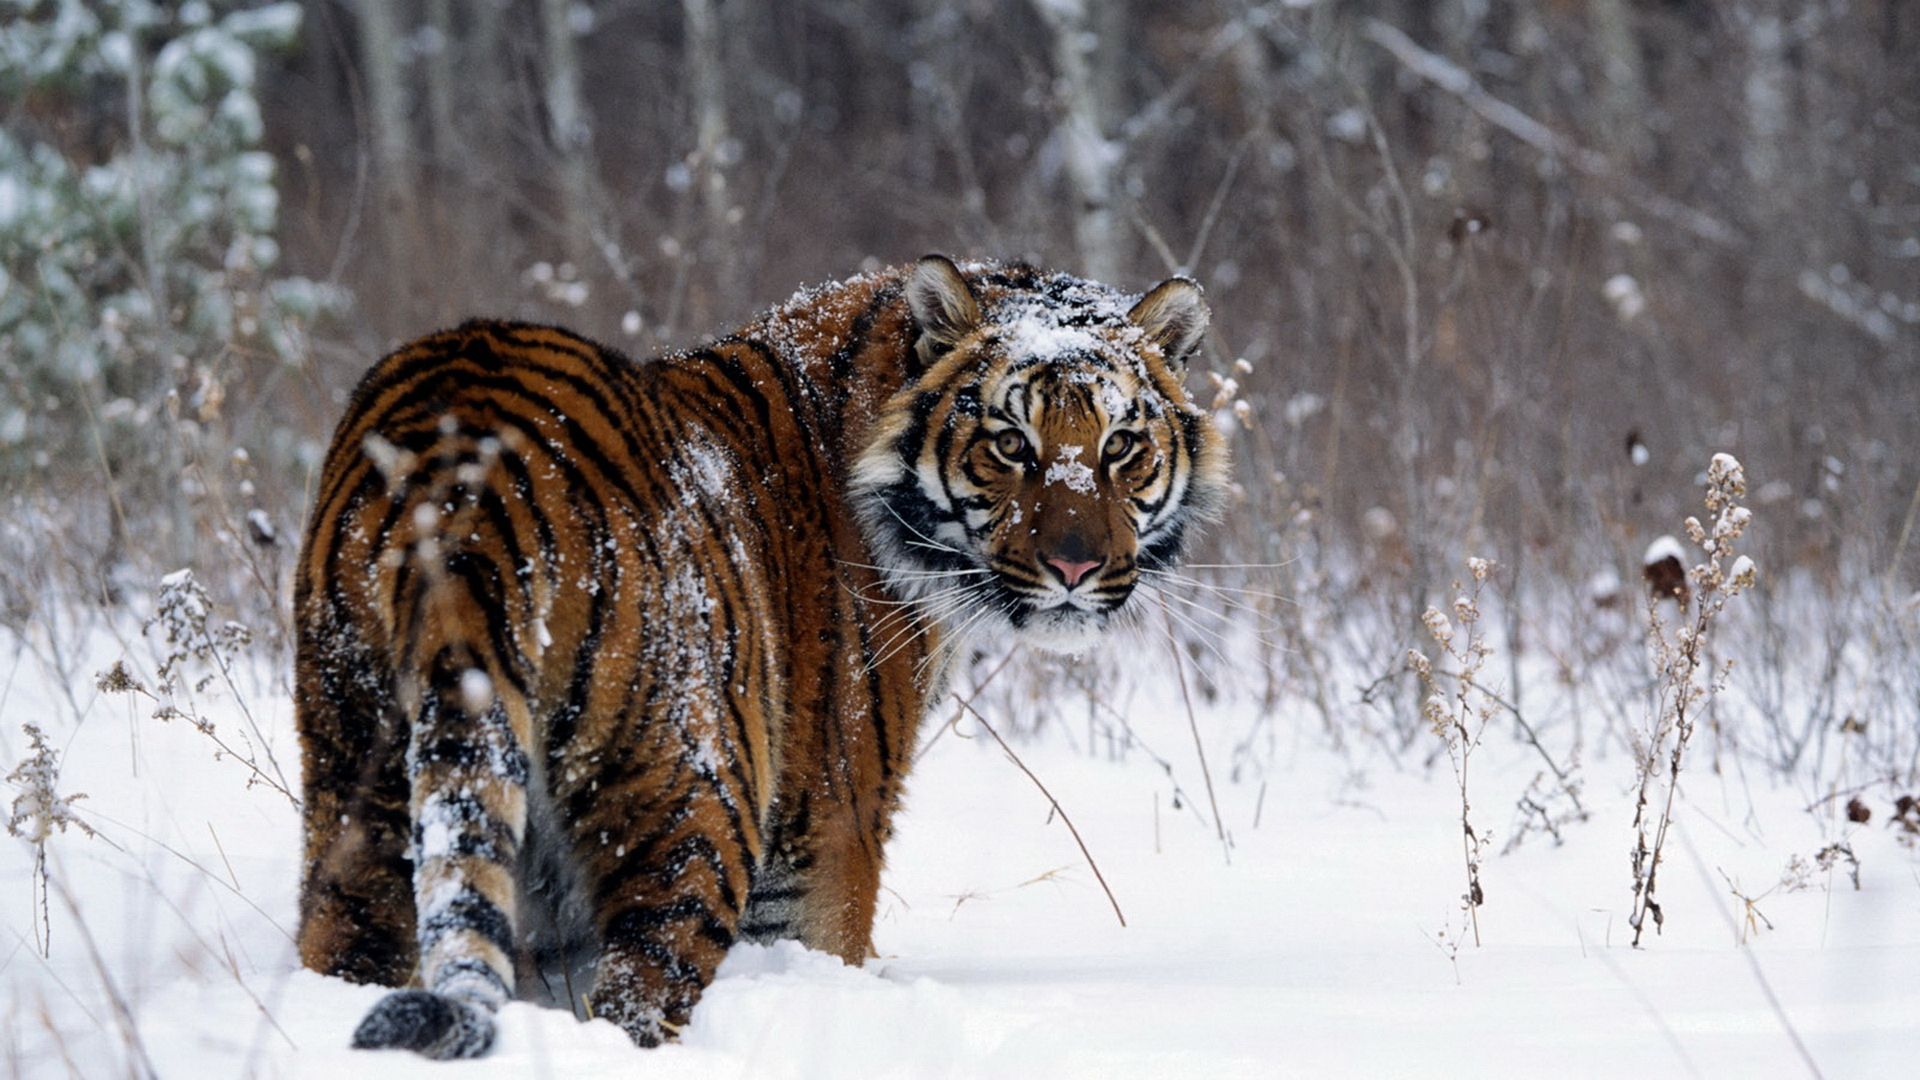 1064 Tiger HD Wallpapers Backgrounds - Wallpaper Abyss